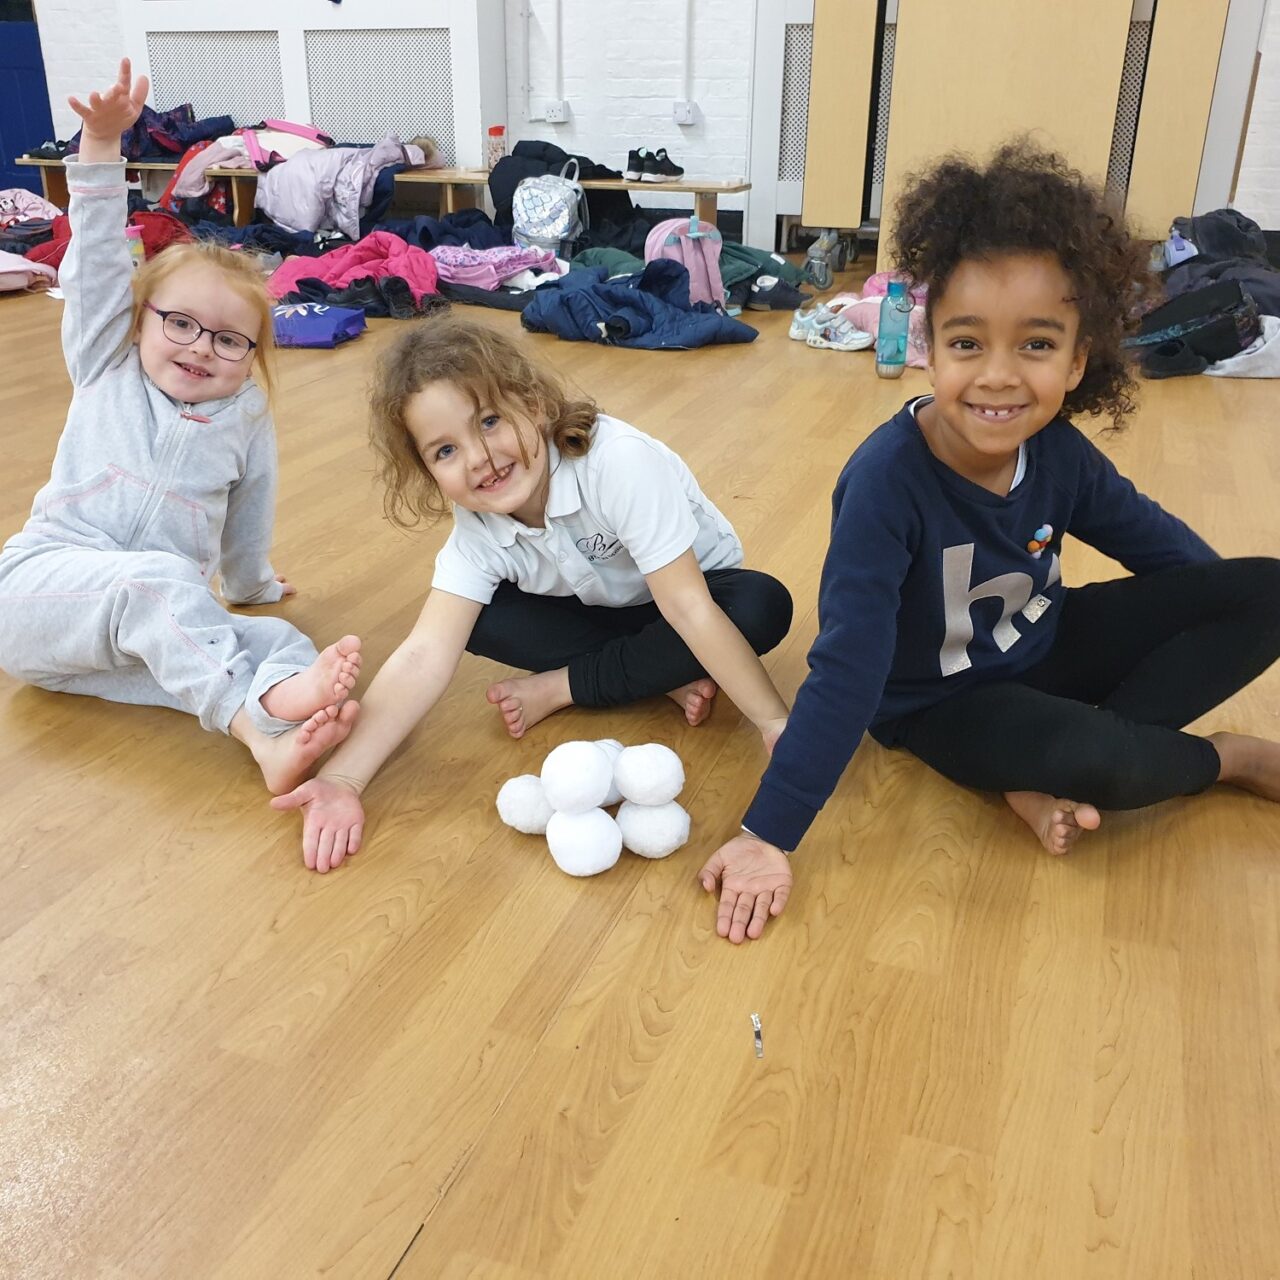 https://www.therightstepdc.co.uk/wp-content/uploads/2022/12/SQ-Byron-Primary-Right-Step-Dance-Club-snow-balls-1280x1280.jpg